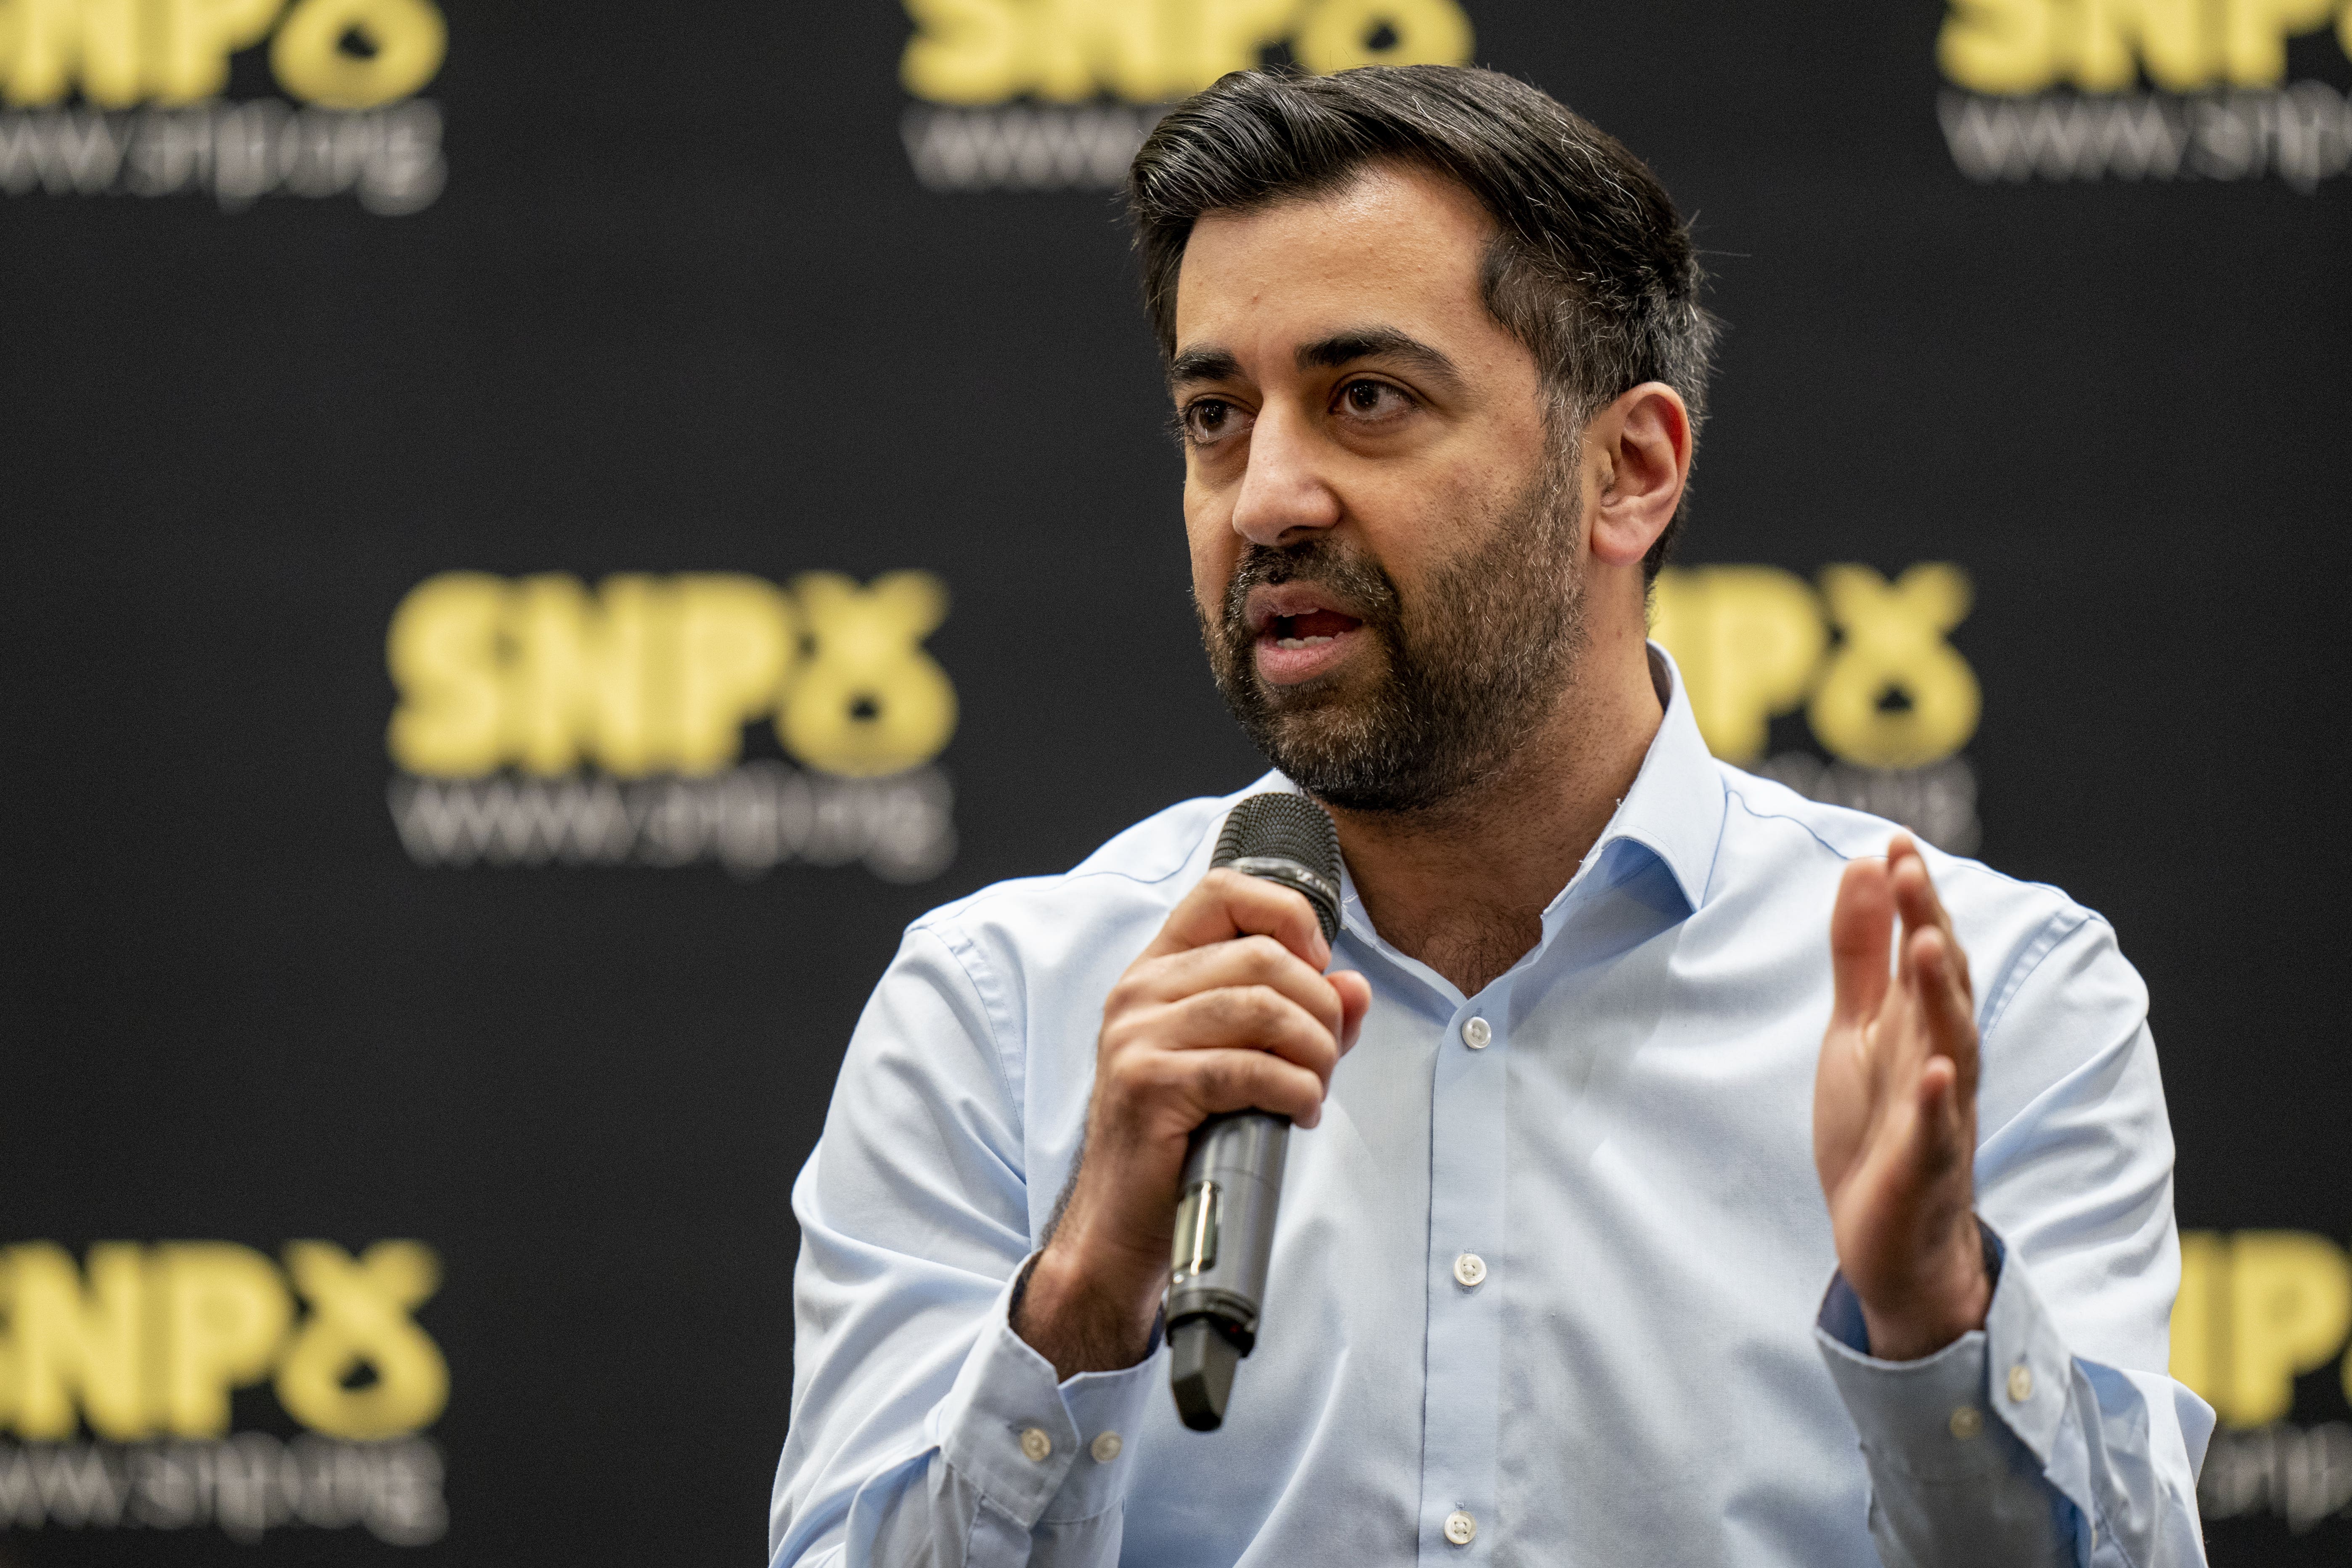 SNP leader Humza Yousaf has inherited a party in turmoil